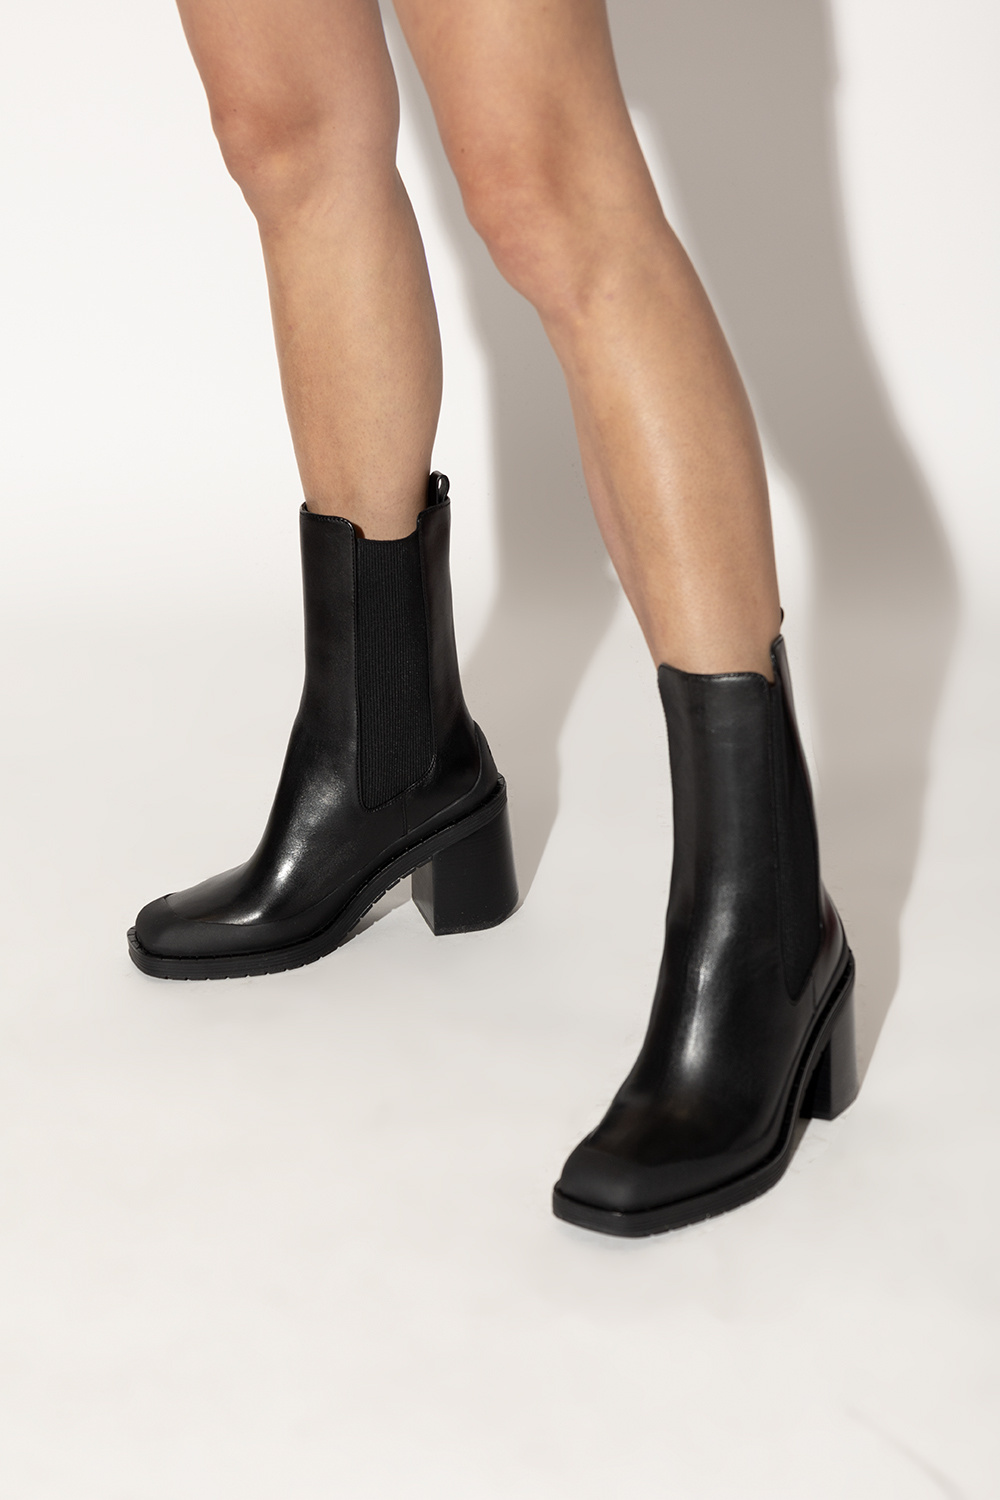 Black 'Expedition' heeled ankle boots Tory Burch - Vitkac KR